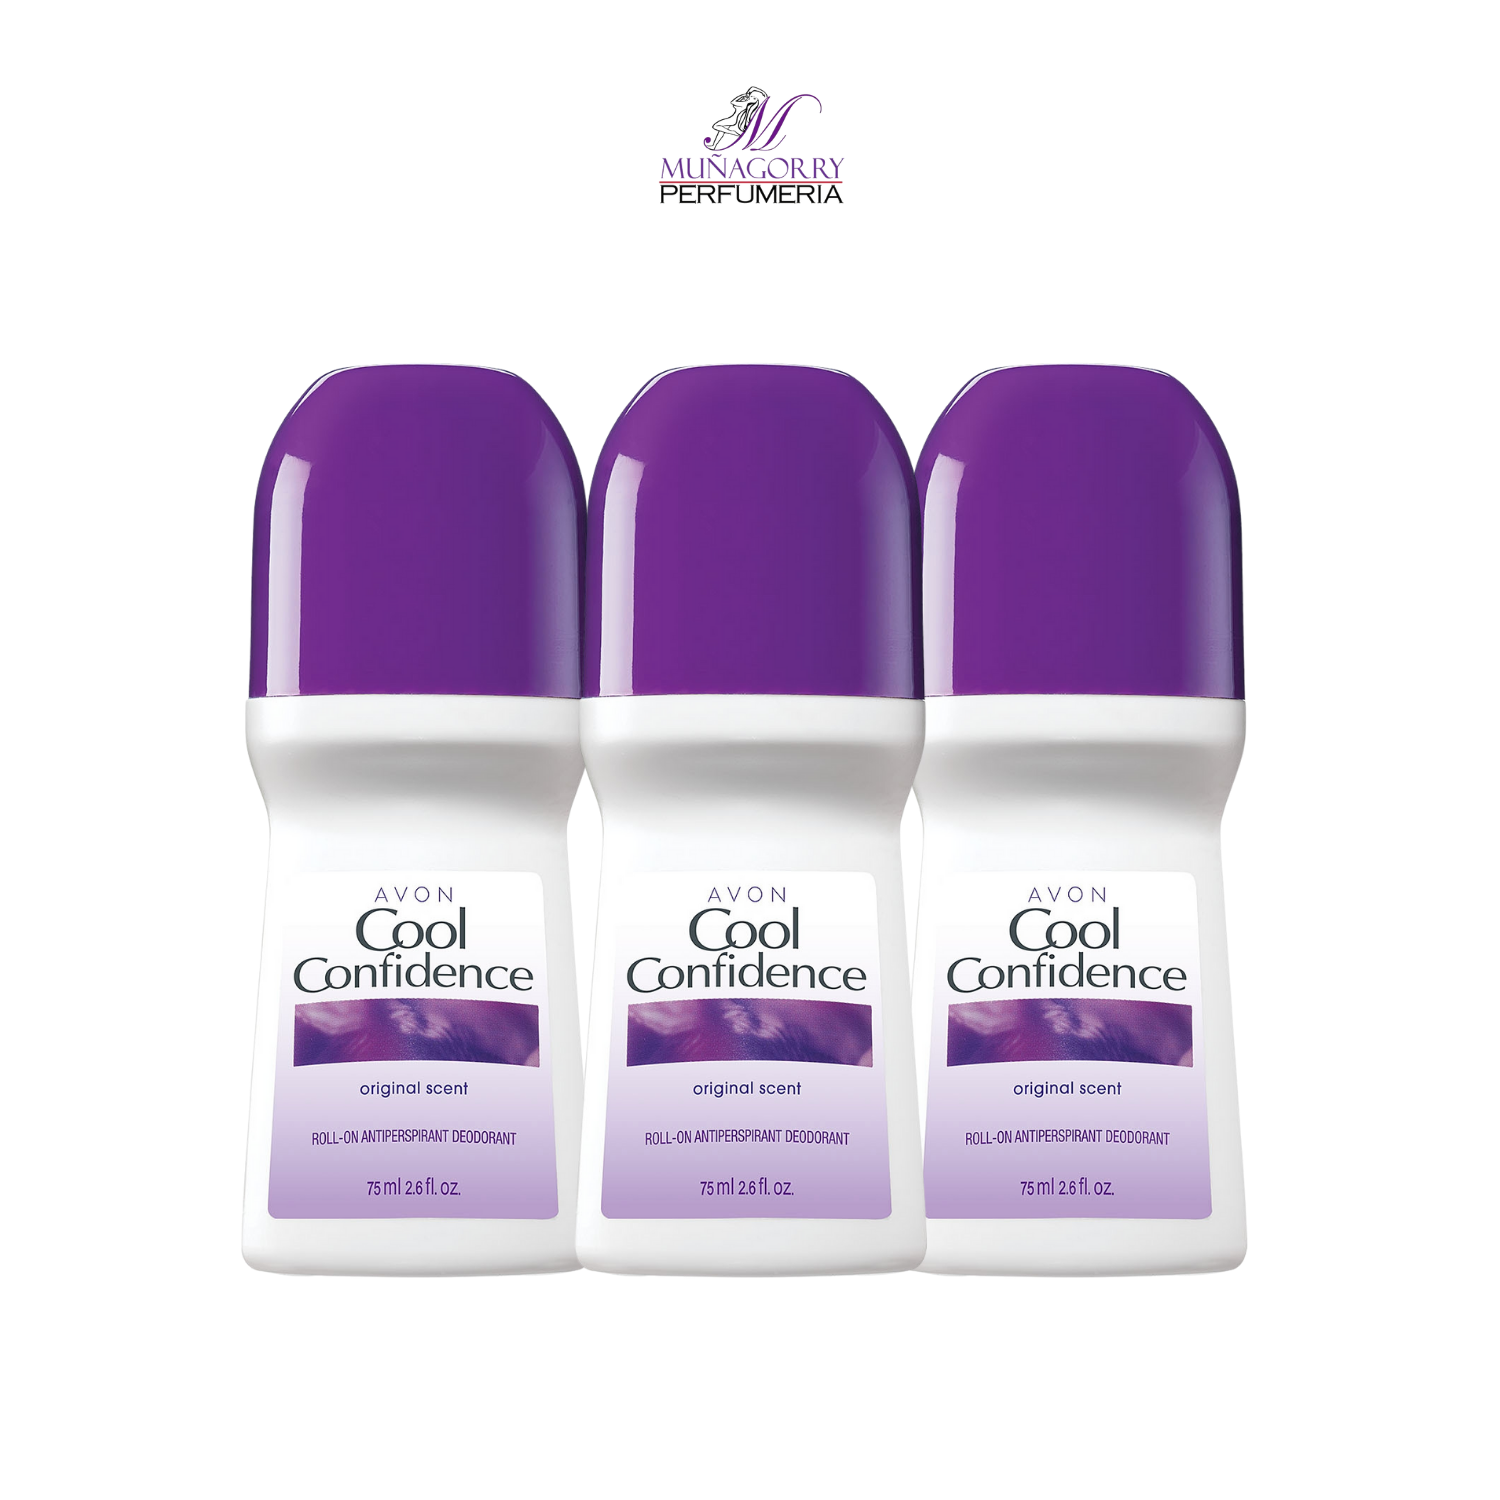 [3] COOL CONFIDENCE ORIGINAL SCENT ROLL-ON ANTIPERSPIRANT DEODORANT BY AVON | 2.6OZ EACH